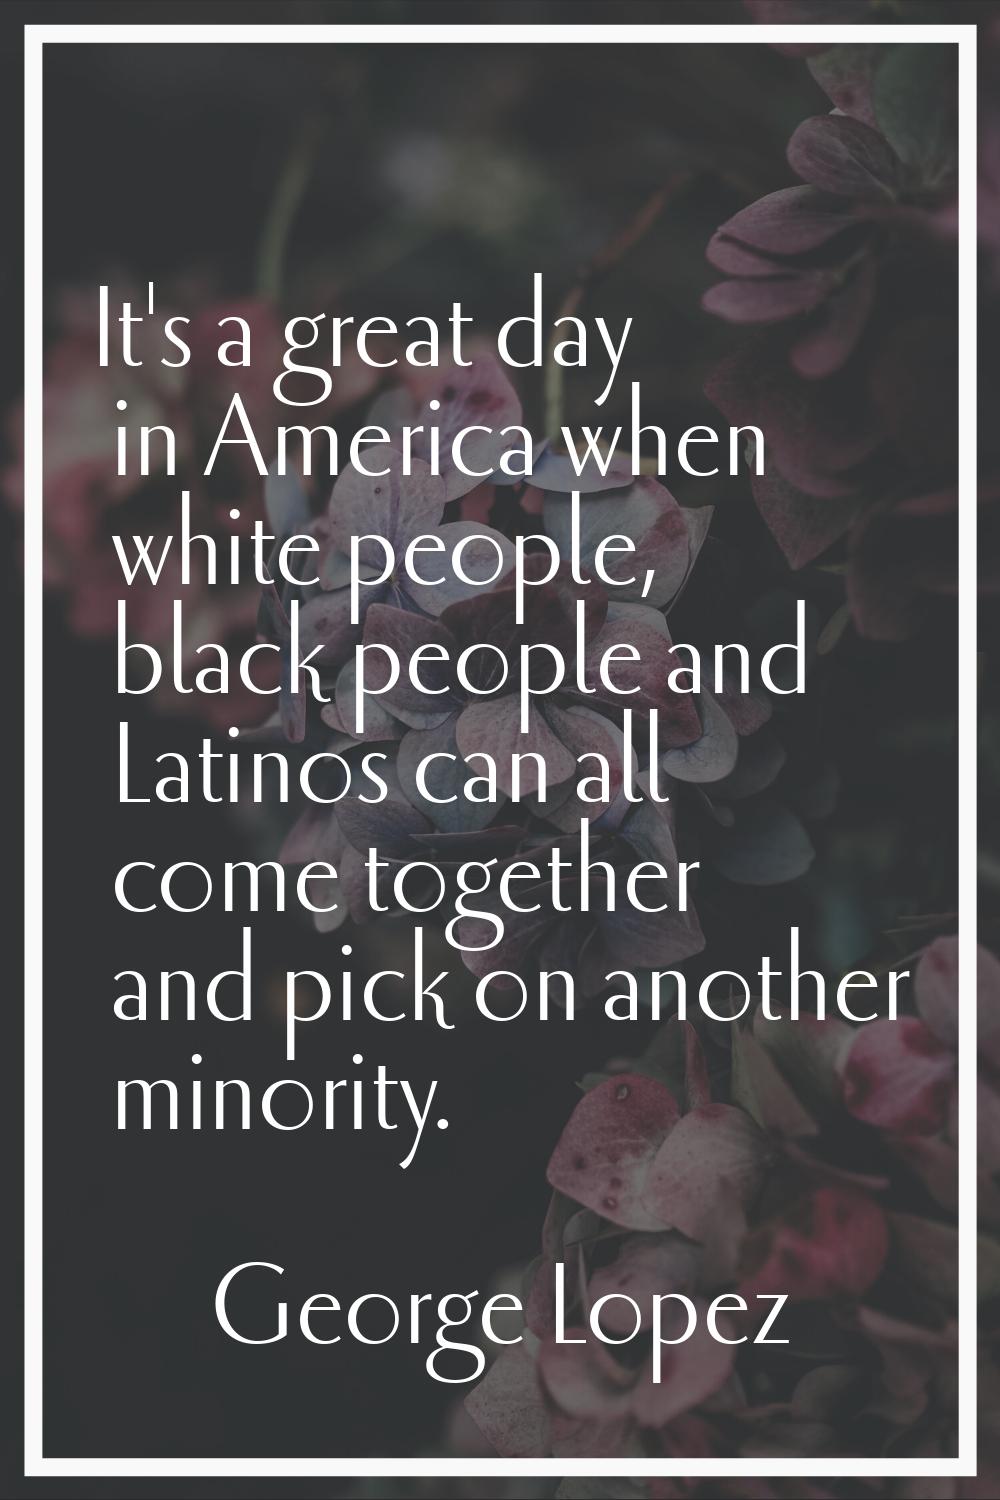 It's a great day in America when white people, black people and Latinos can all come together and p